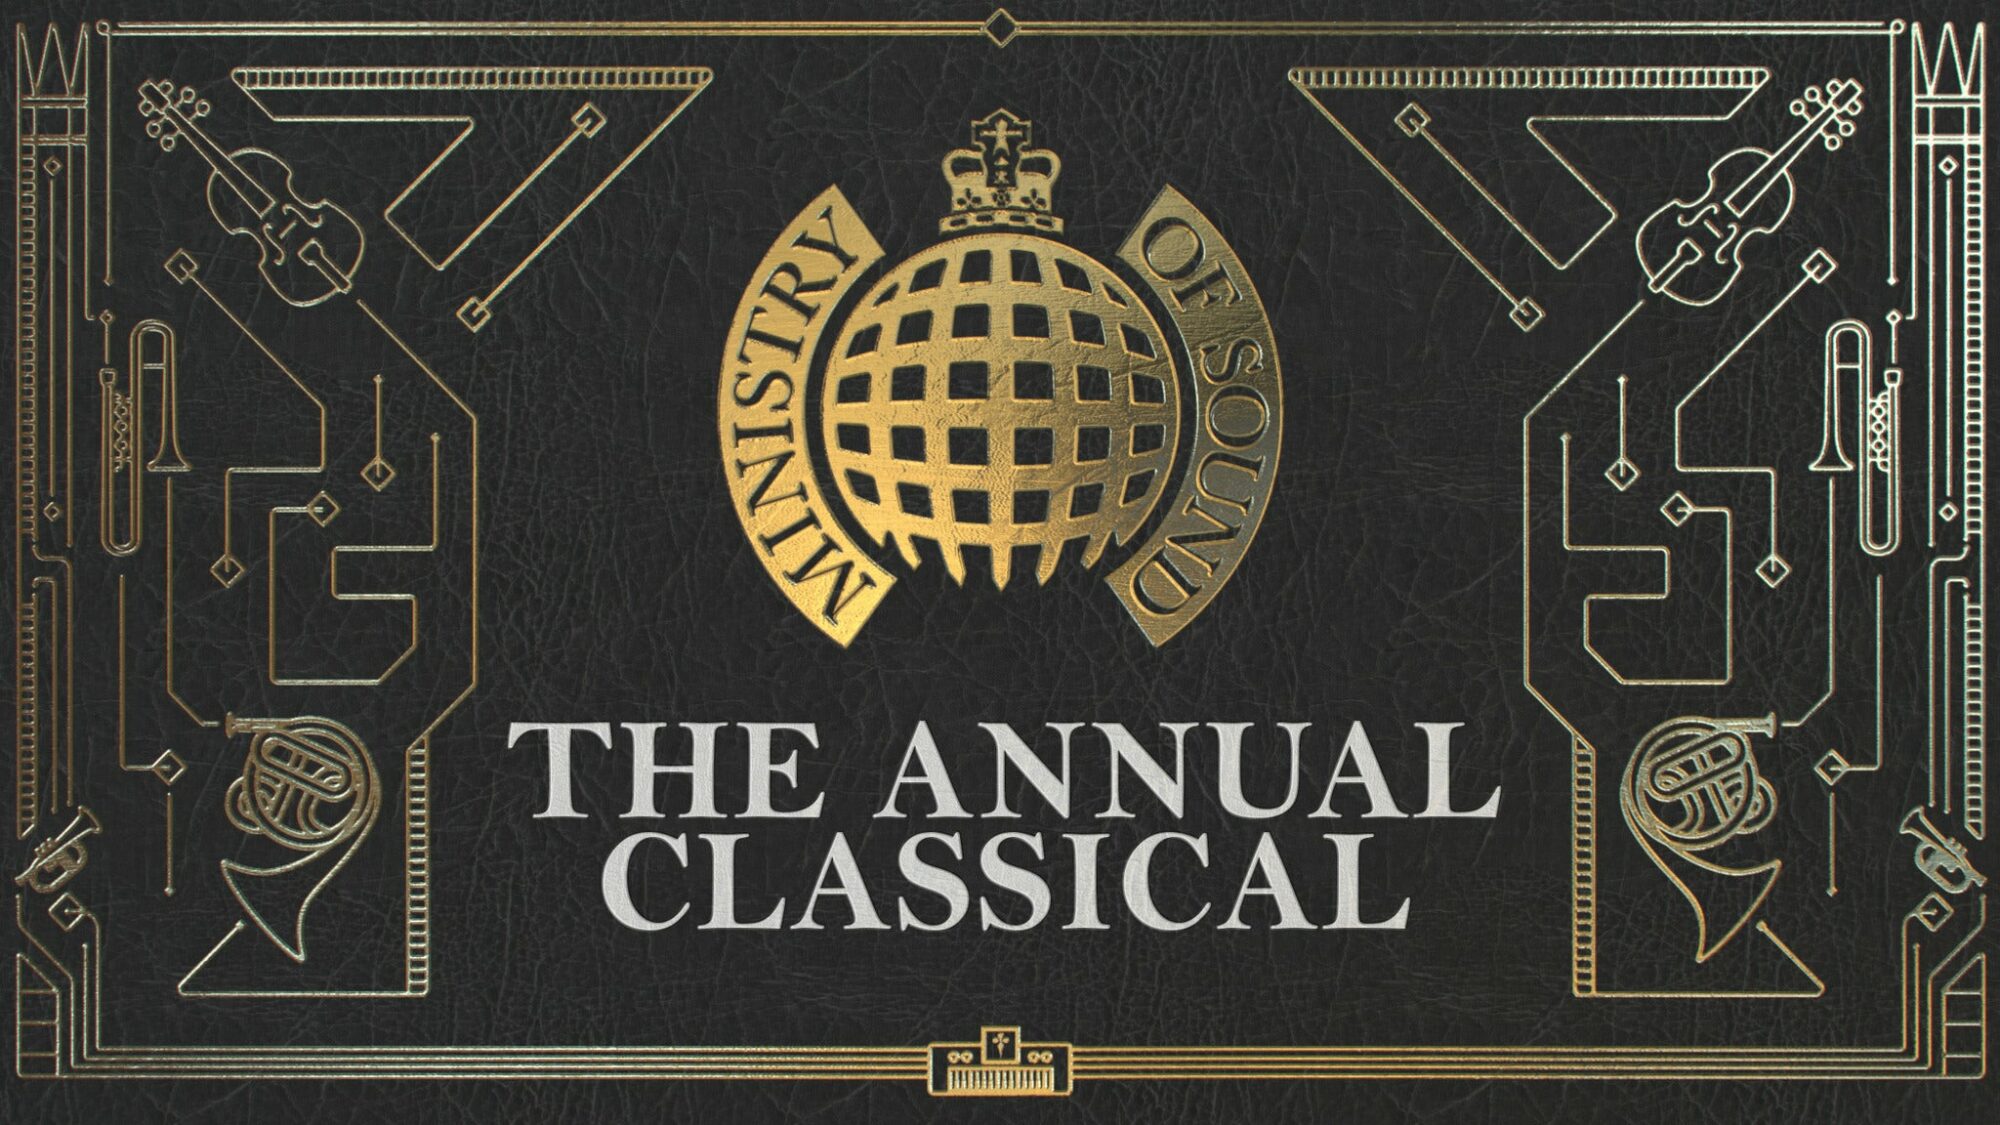 Image name Ministry of Sound Classical Ticket Hotel Packages at The Piece Hall the 1 image from the post Ministry of Sound Classical Ticket + Hotel Packages at The Piece Hall, Halifax in Yorkshire.com.